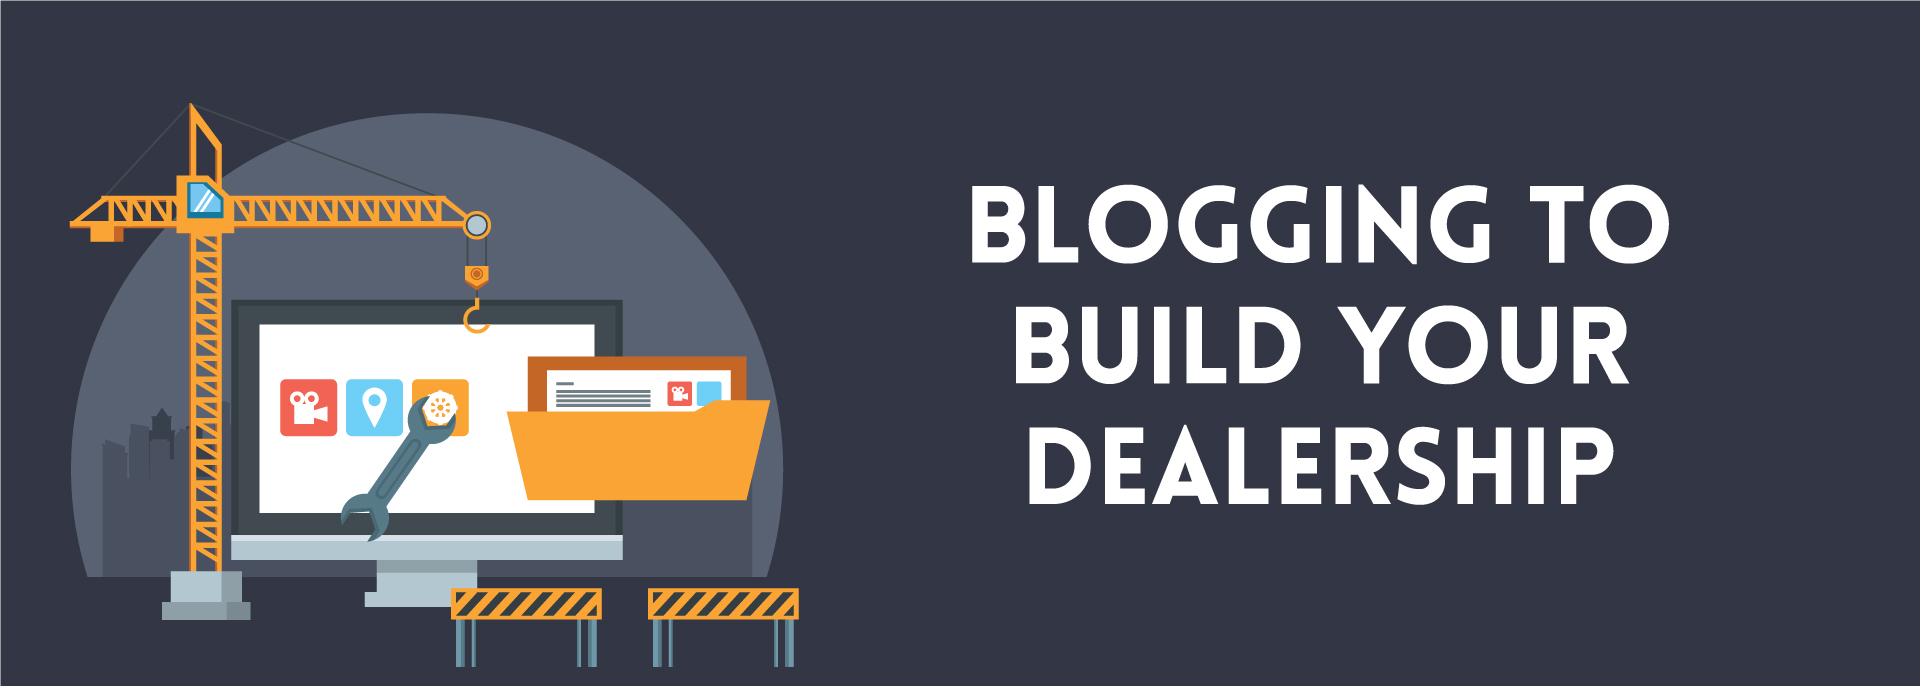 Blogging to Build your Dealership | ADI Agency